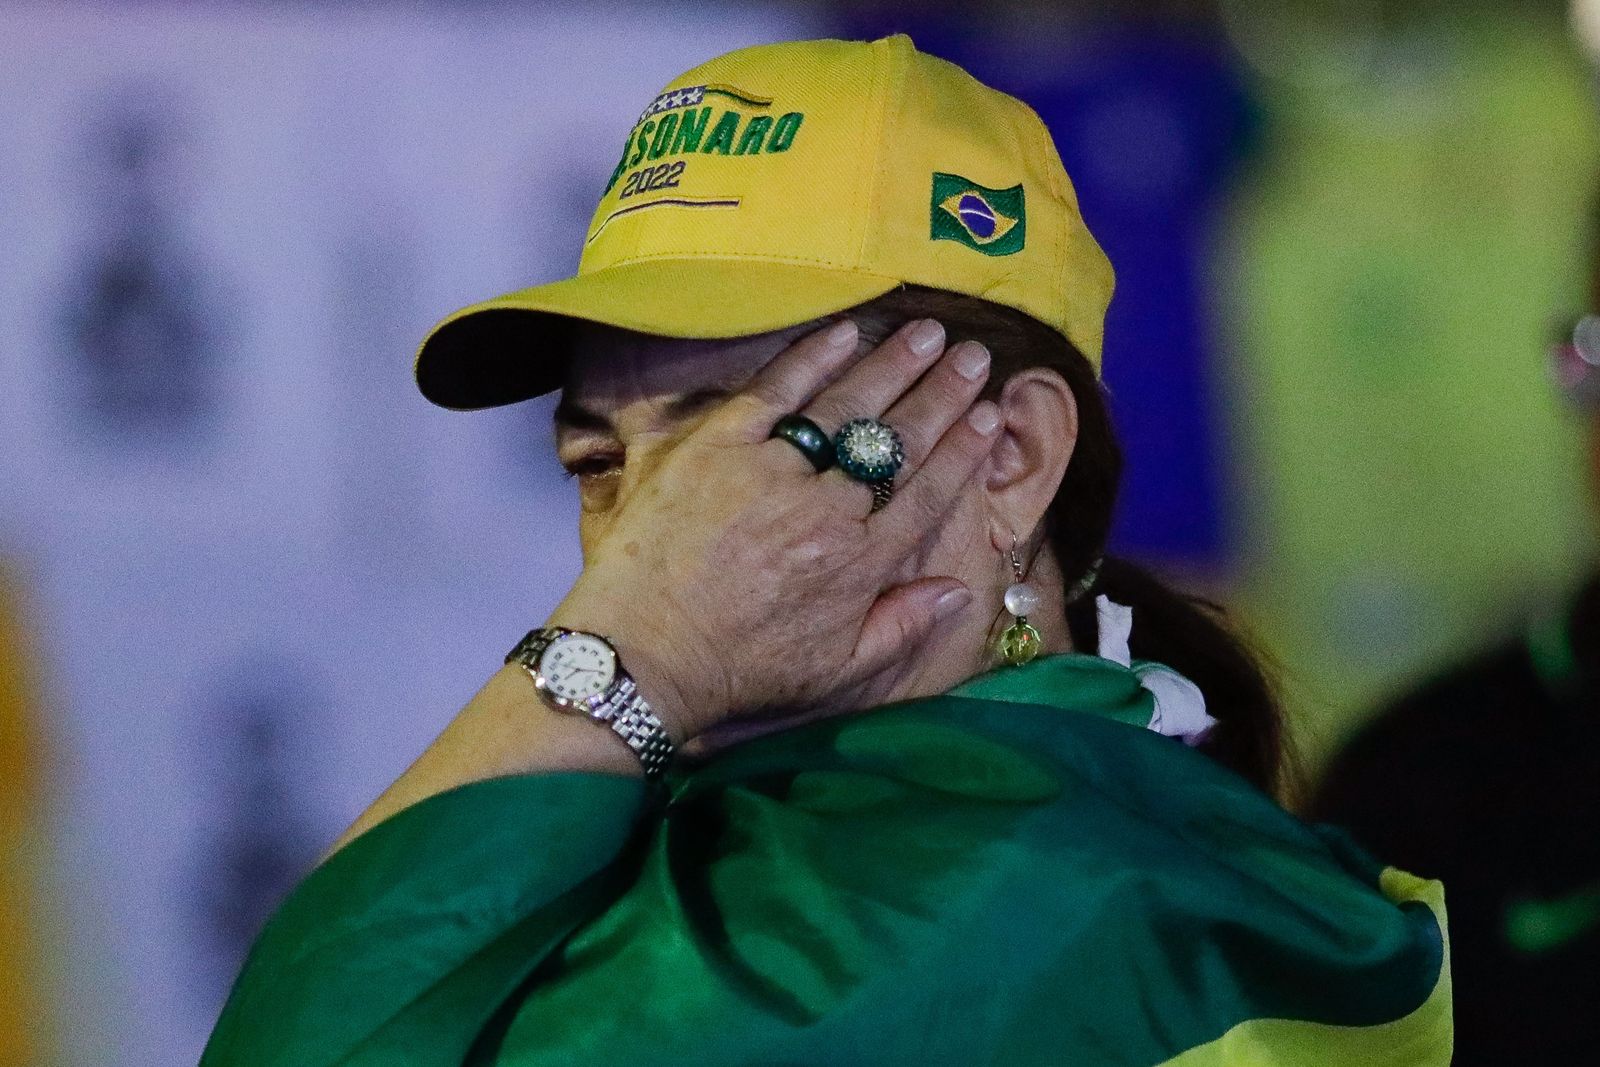 A supporter of Brazilian President and re-election candidate Jair Bolsonaro cries after the vote count of the legislative and presidential election, in Brasilia, Brazil, on October 2, 2022. - Brazil's bitterly divisive presidential election will go to a runoff on October 30, electoral authorities said Sunday, as incumbent Jair Bolsonaro beat expectations to finish a relatively close second to front-runner Luiz Inacio Lula da Silva. (Photo by Sergio Lima / AFP) - AFP